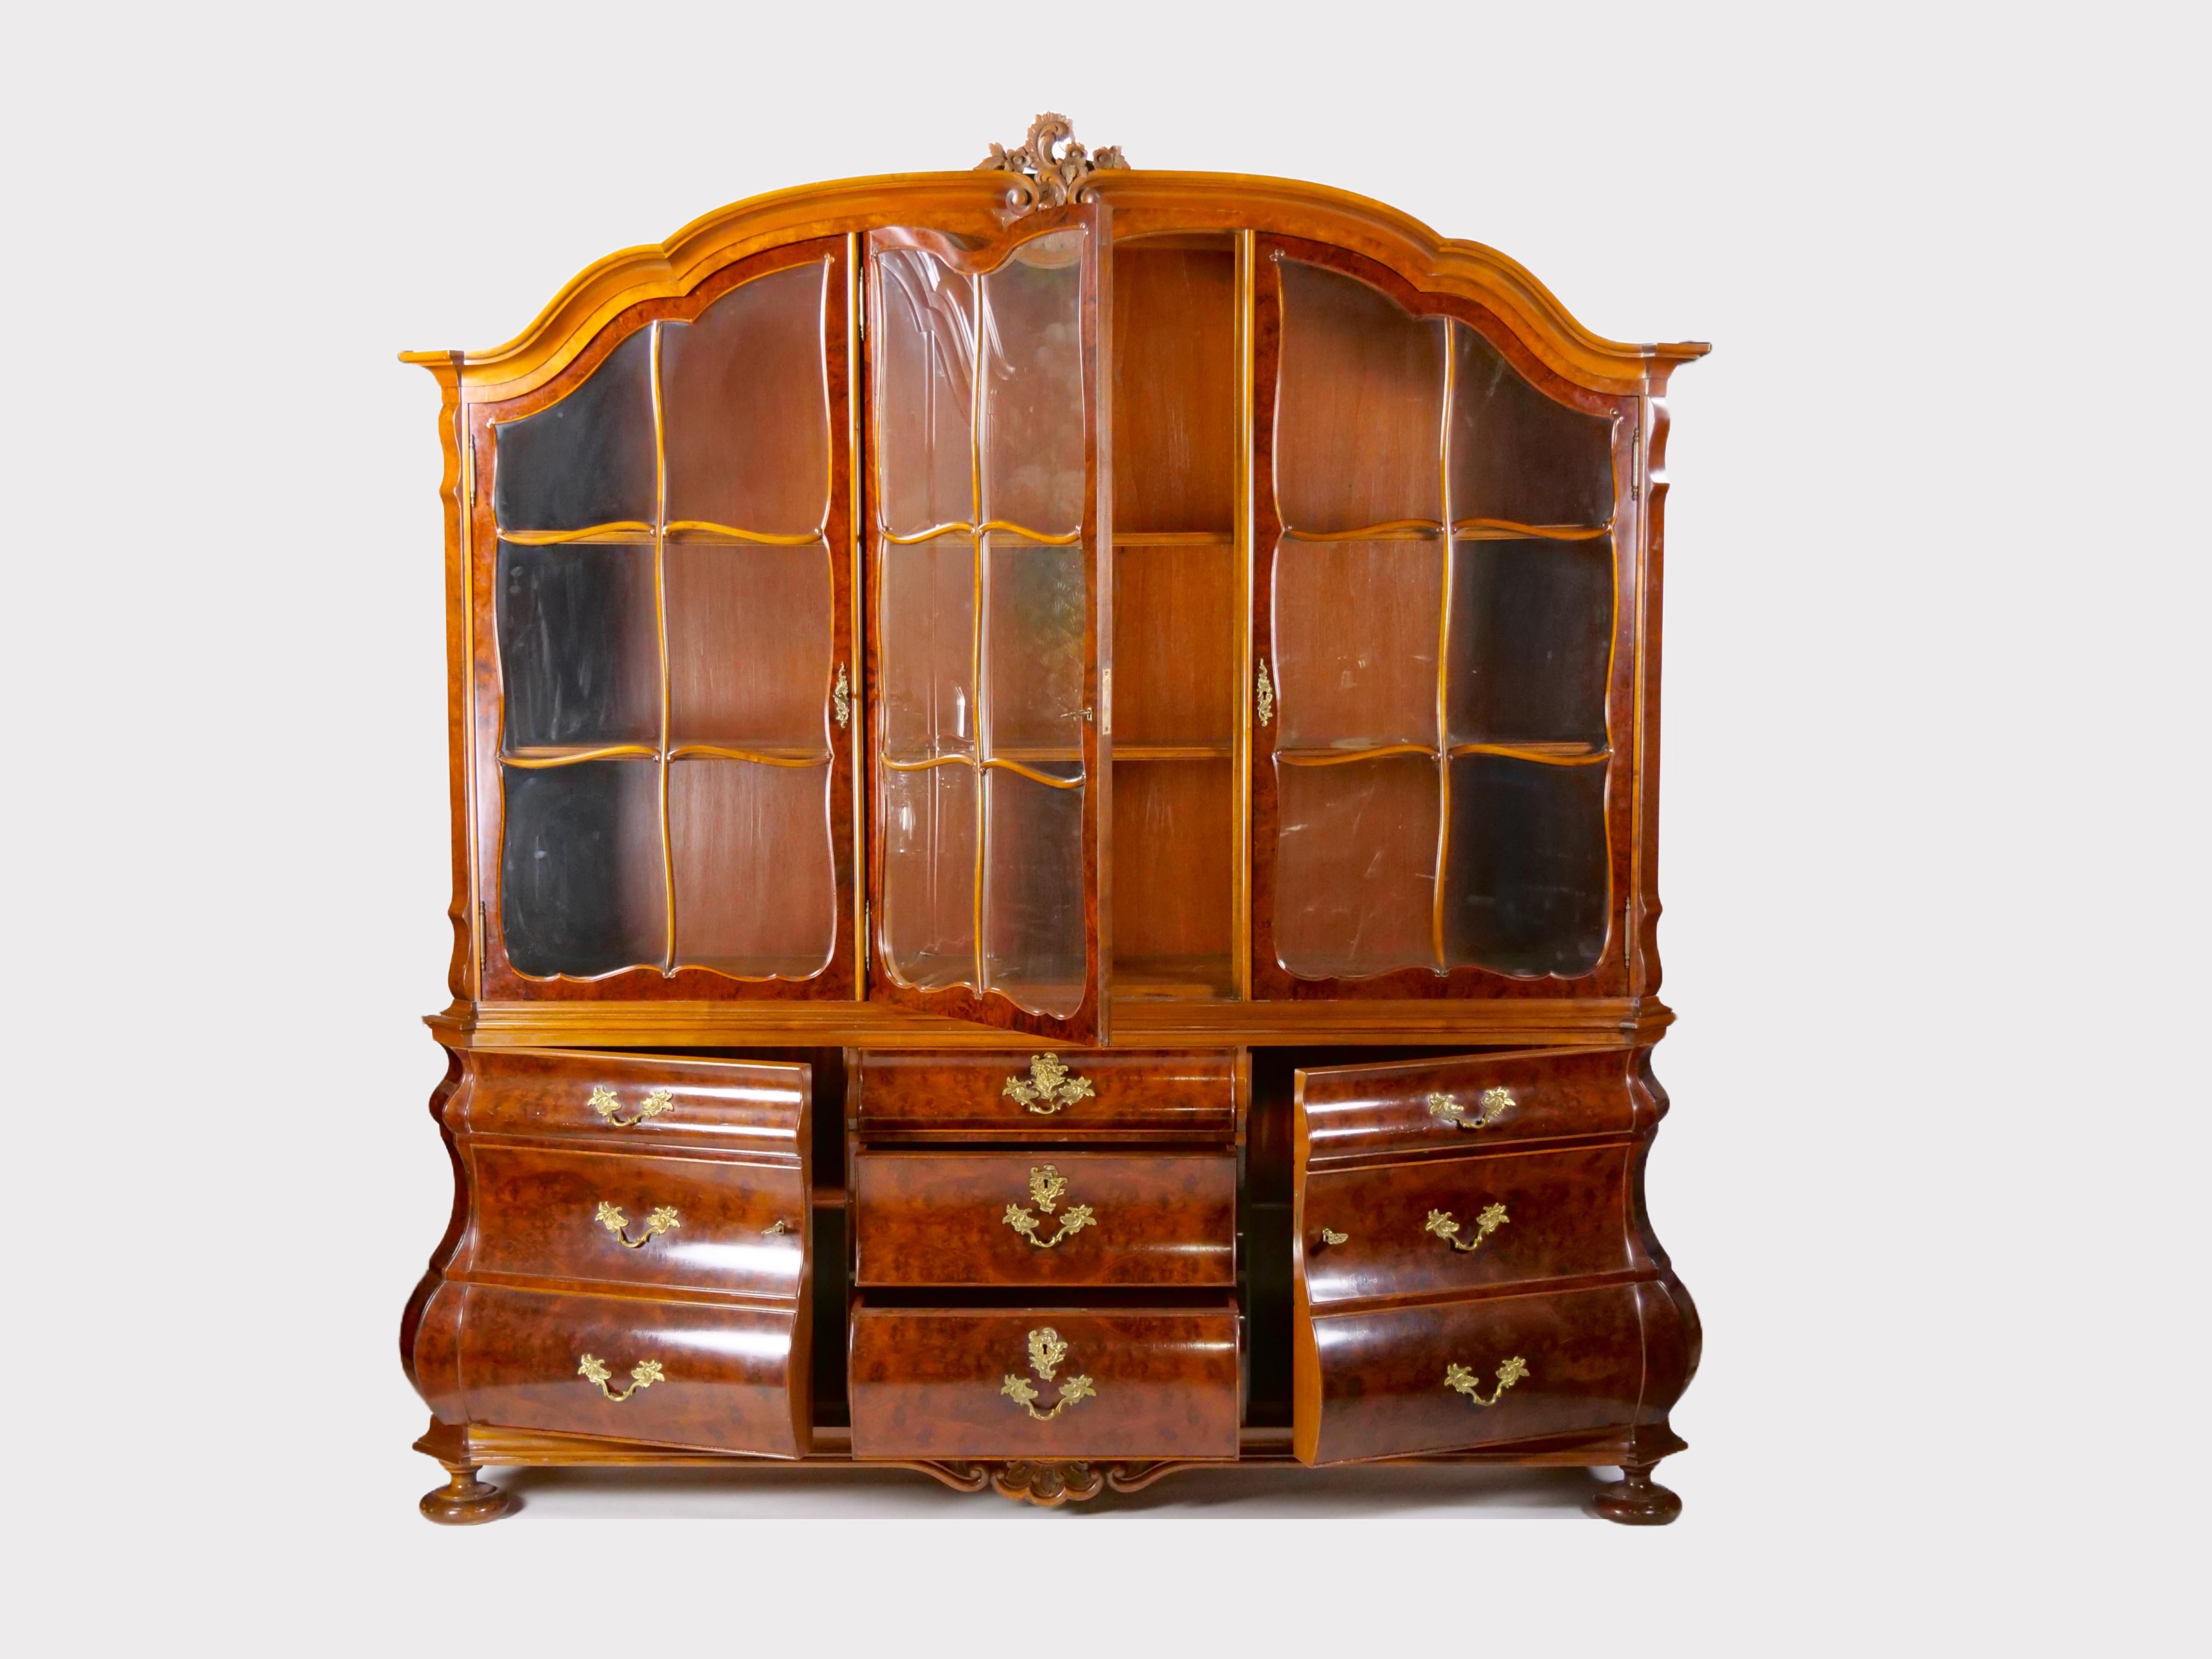 
Discover a truly exceptional and generously sized two part vitrine / display cabinet, expertly crafted in the opulent Dutch Baroque style. Its beauty lies in the exquisite walnut veneer that graces its surface, while finely carved accents adorn the